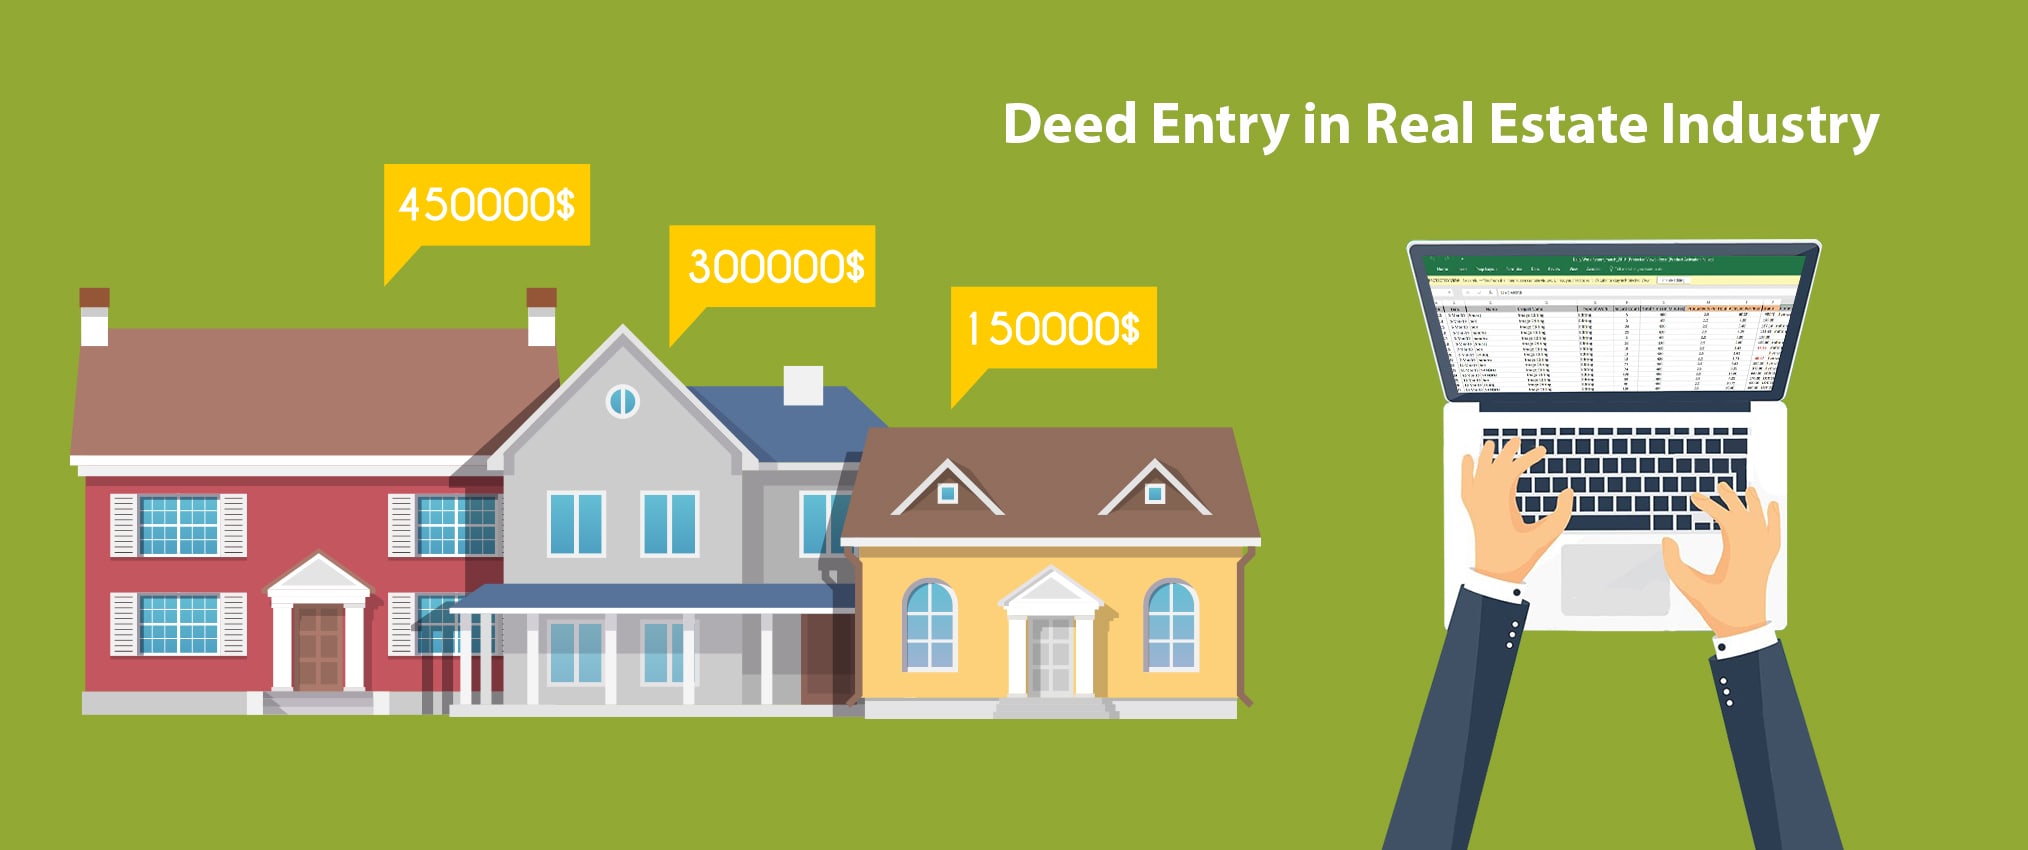 outsourcing deed entry real estate industry